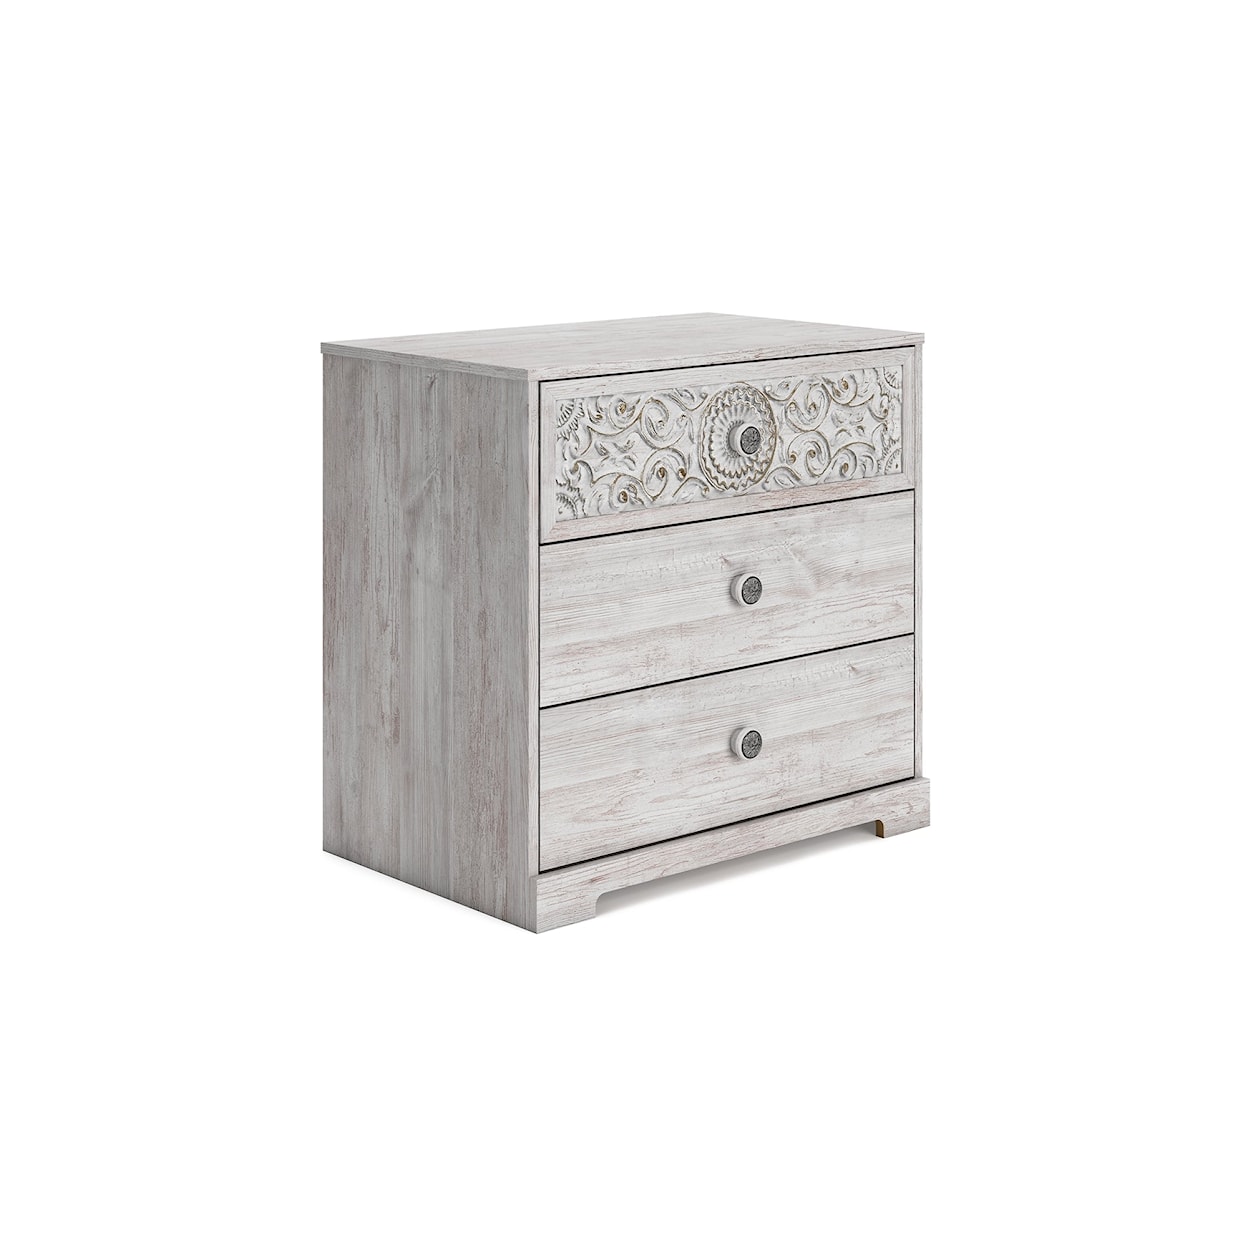 Signature Design by Ashley Paxberry Three Drawer Chest